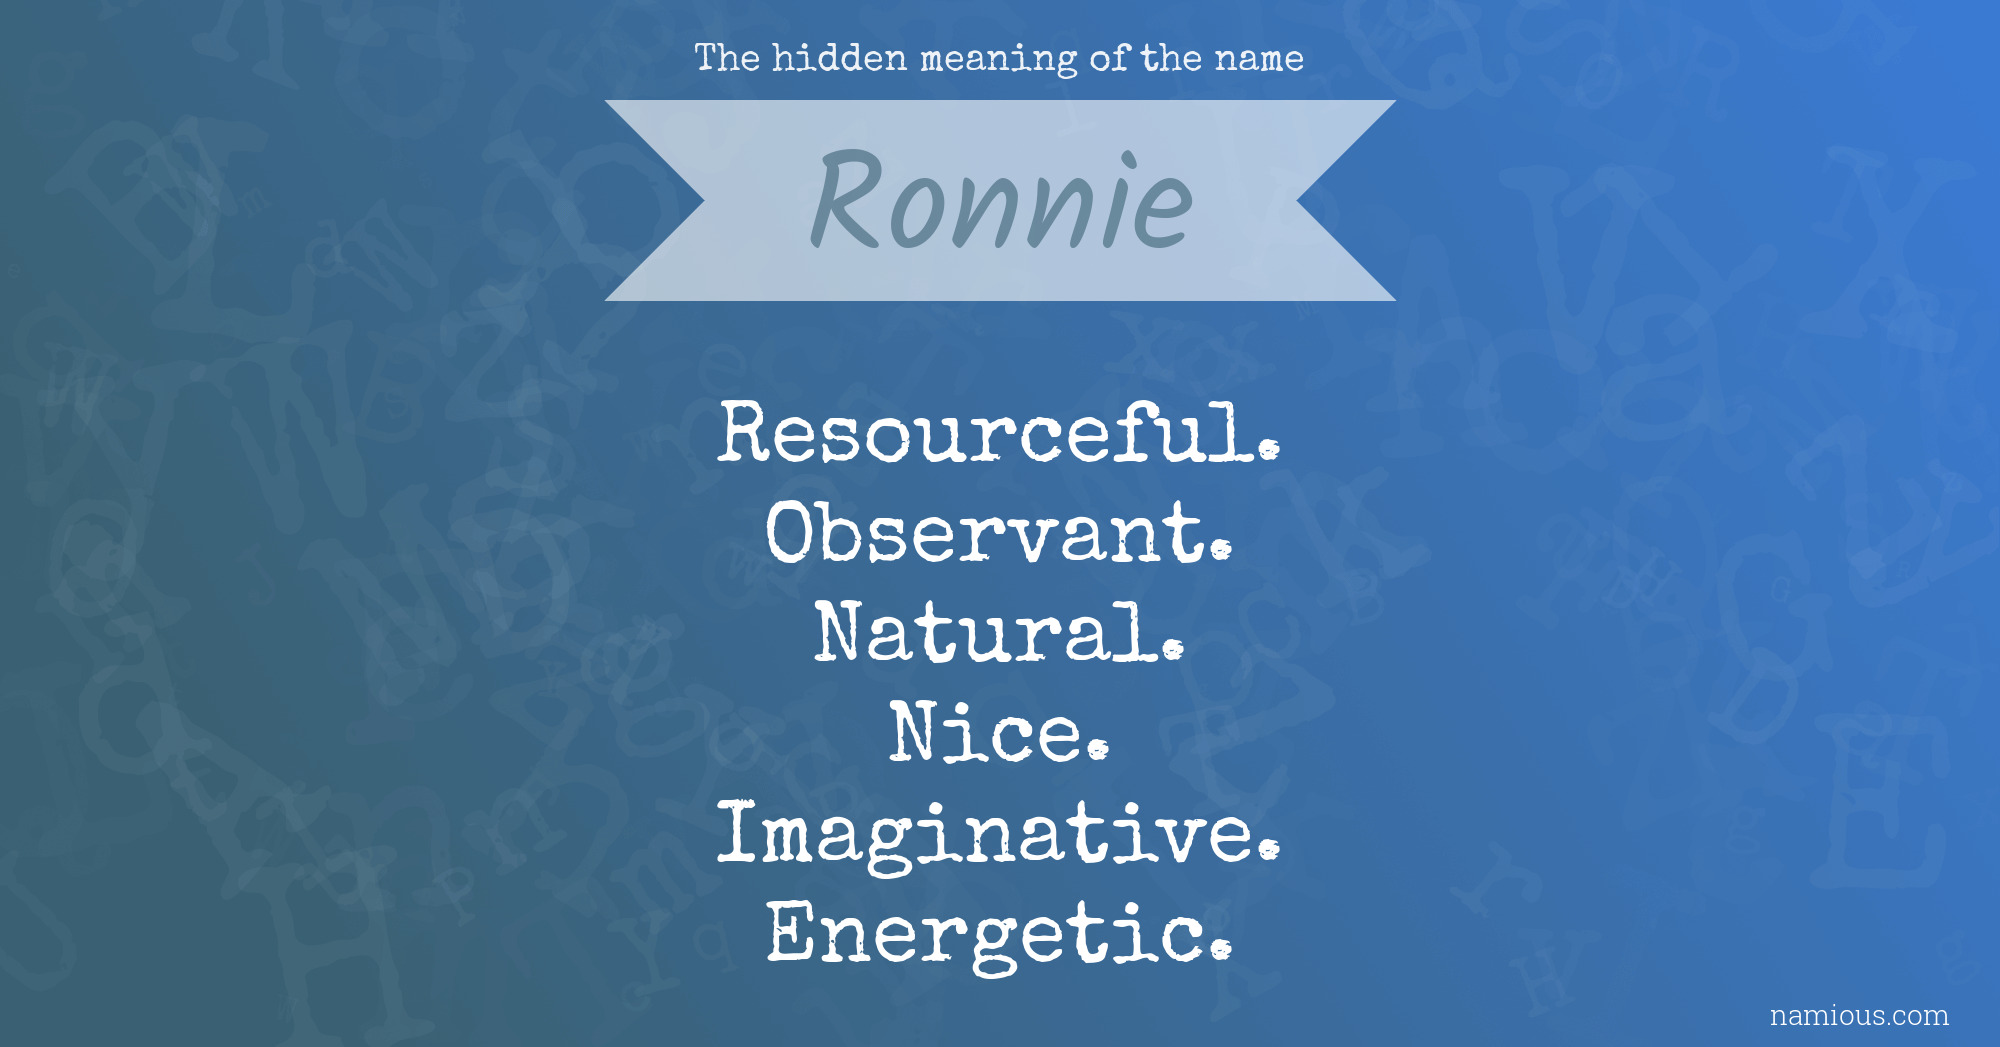 The hidden meaning of the name Ronnie